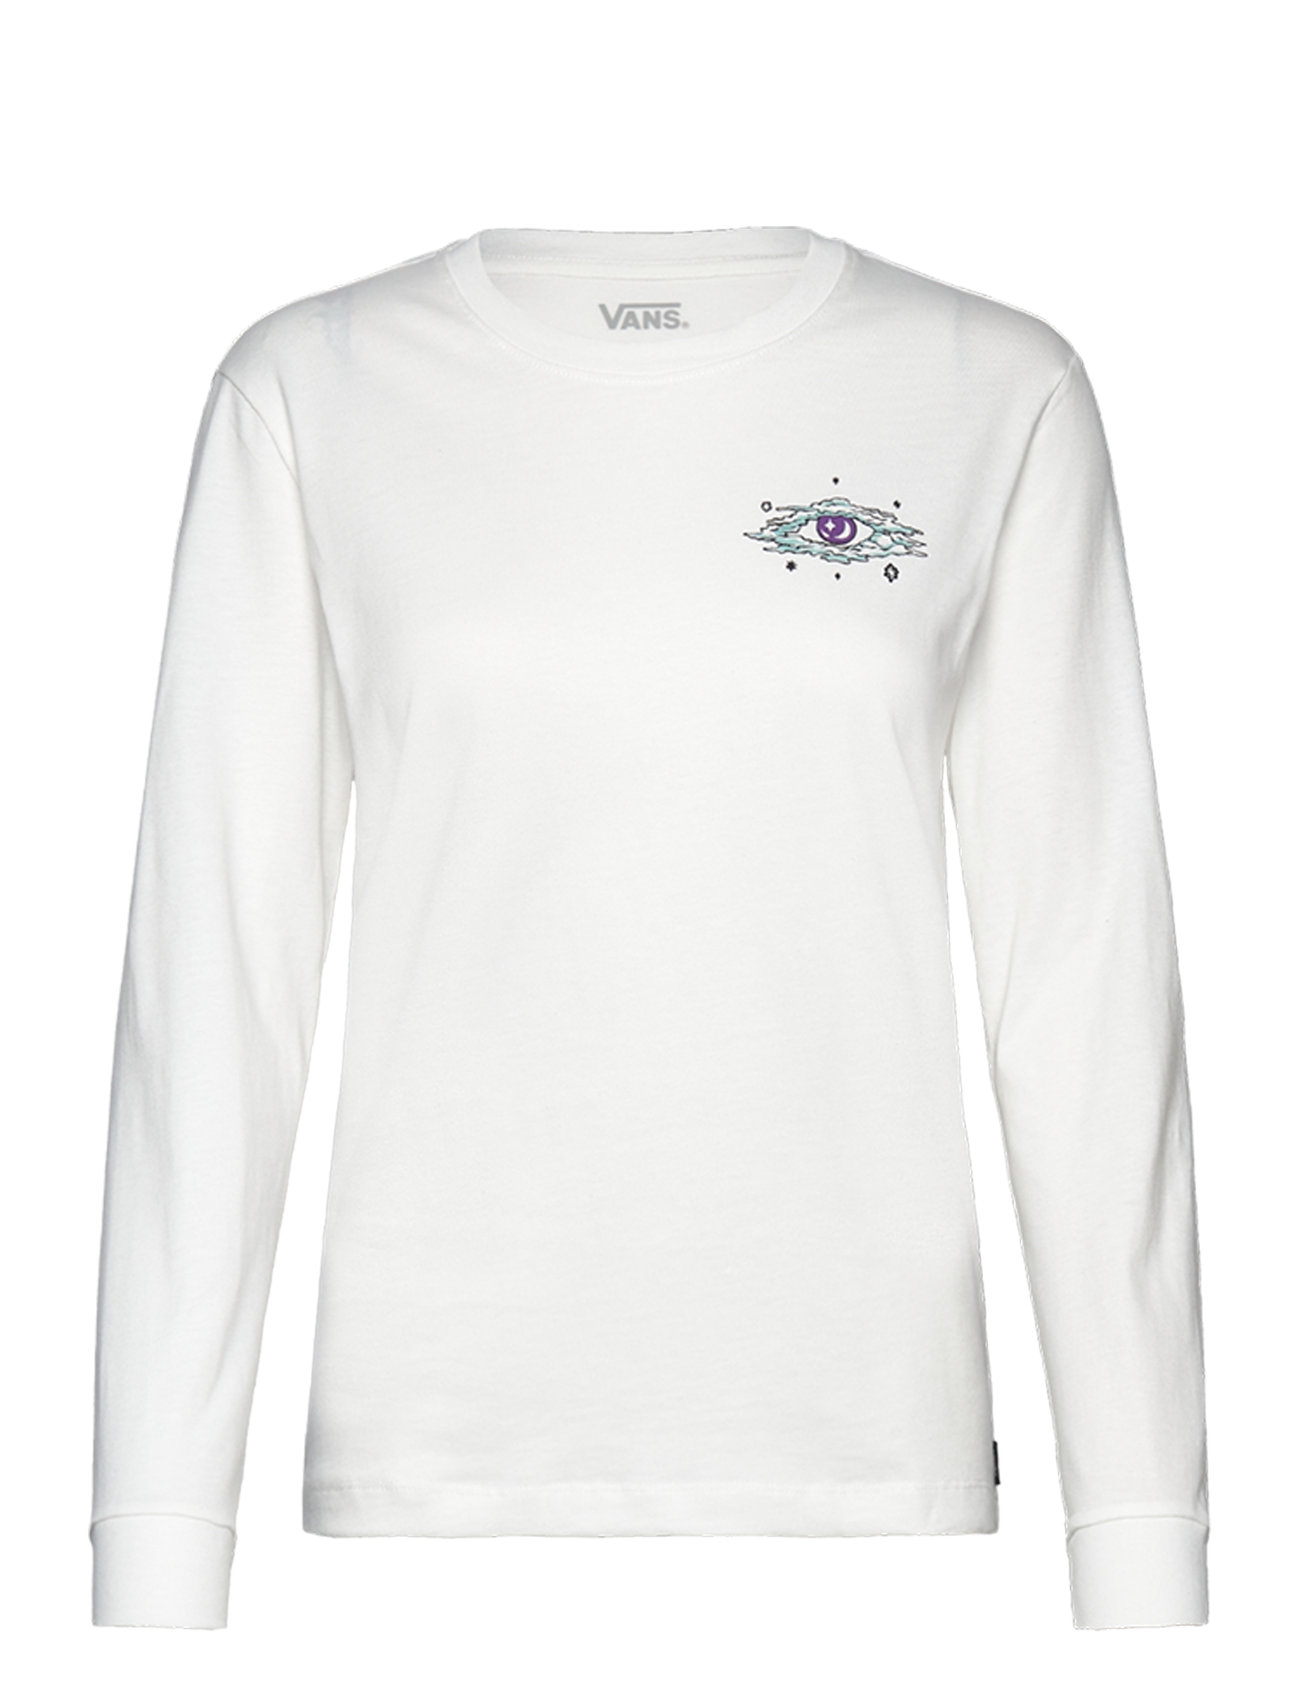 Mystic Vision Ls Bff Sport T-shirts & Tops Long-sleeved White VANS